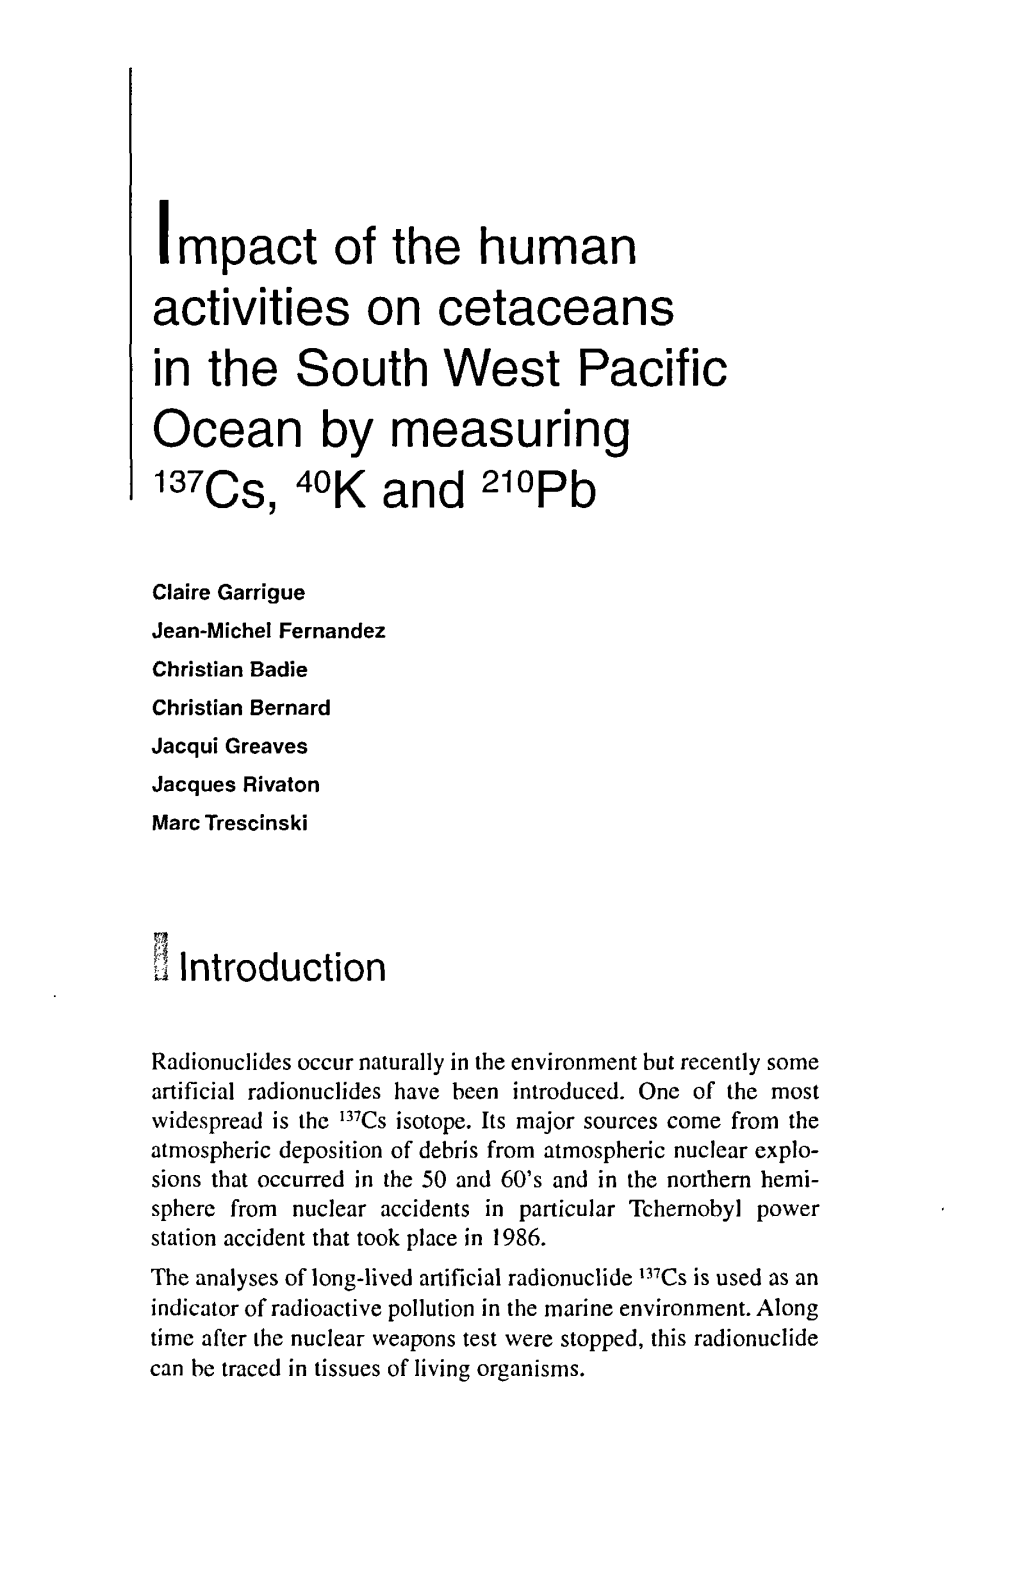 Impact of the Human Activities on Cetaceans in the South West Pacific Ocean by Measuring 1387Cs, 40K and 210Pb